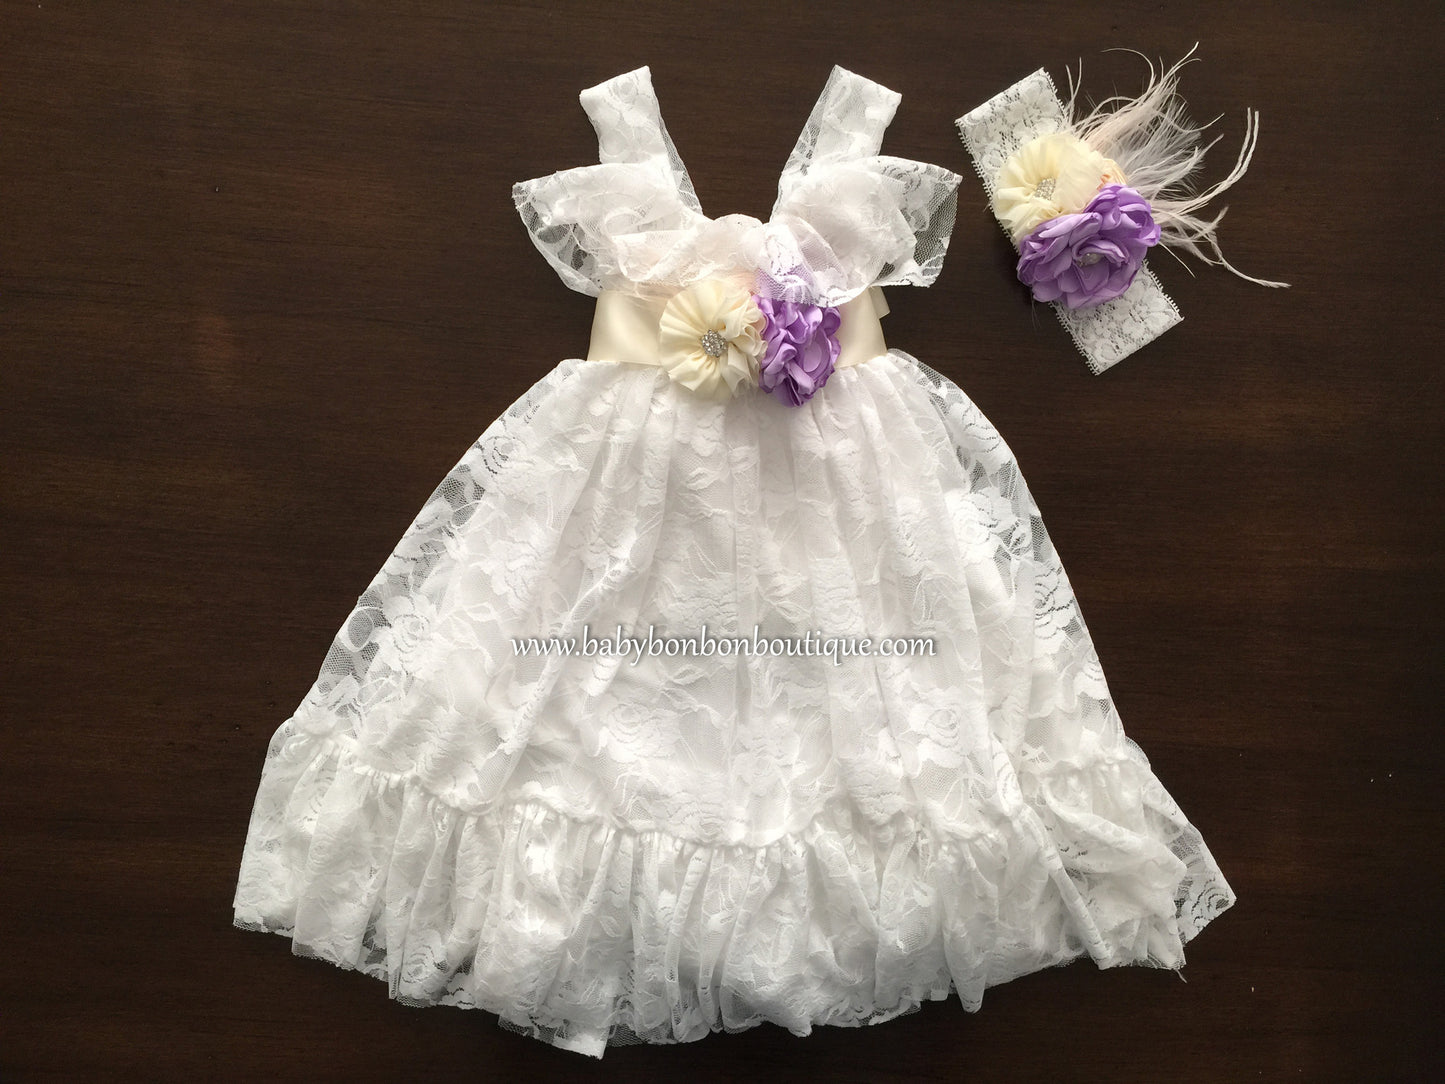 White Lace Baptism Dress, French White Lace Flower Girl Dress